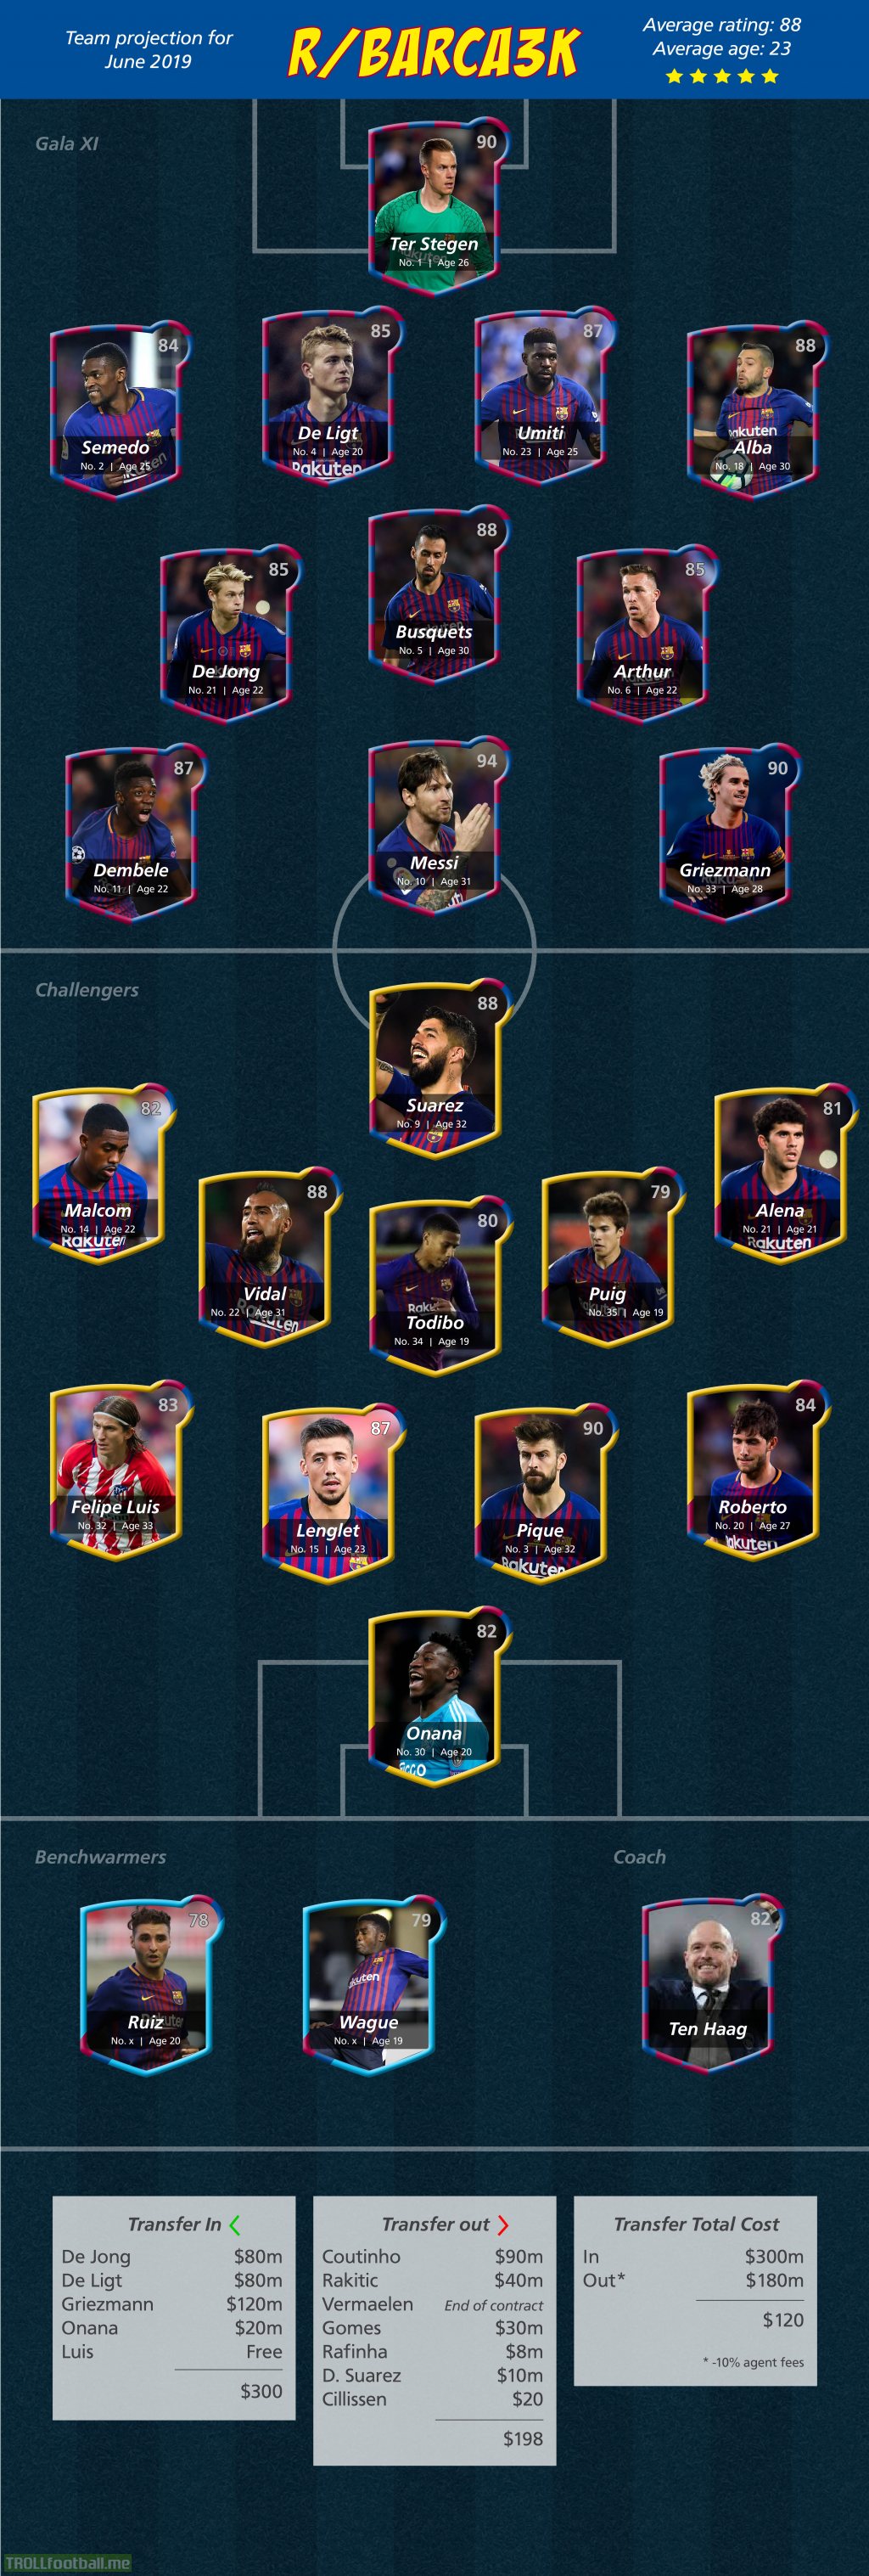 The Barca line-up for the coming season looks lit if the most likely rumoured deals go through.